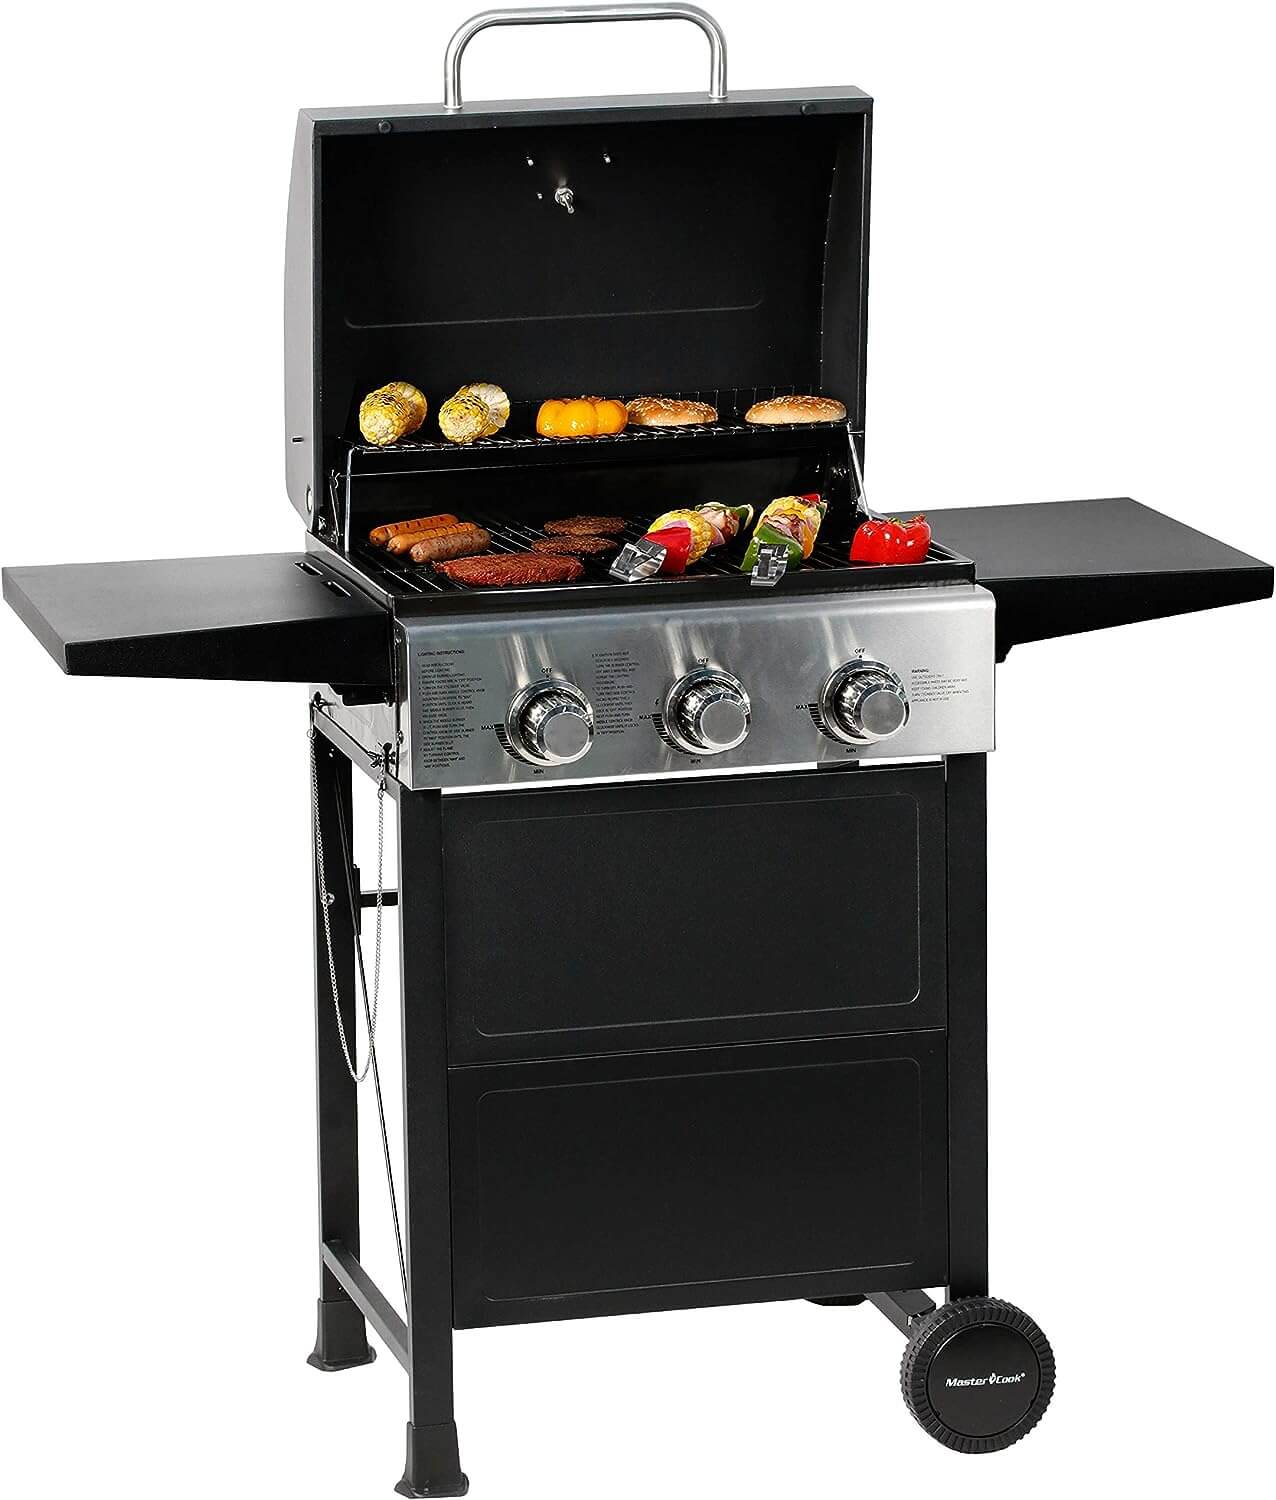 MASTER COOK SRGG31403 Propane Gas Grill